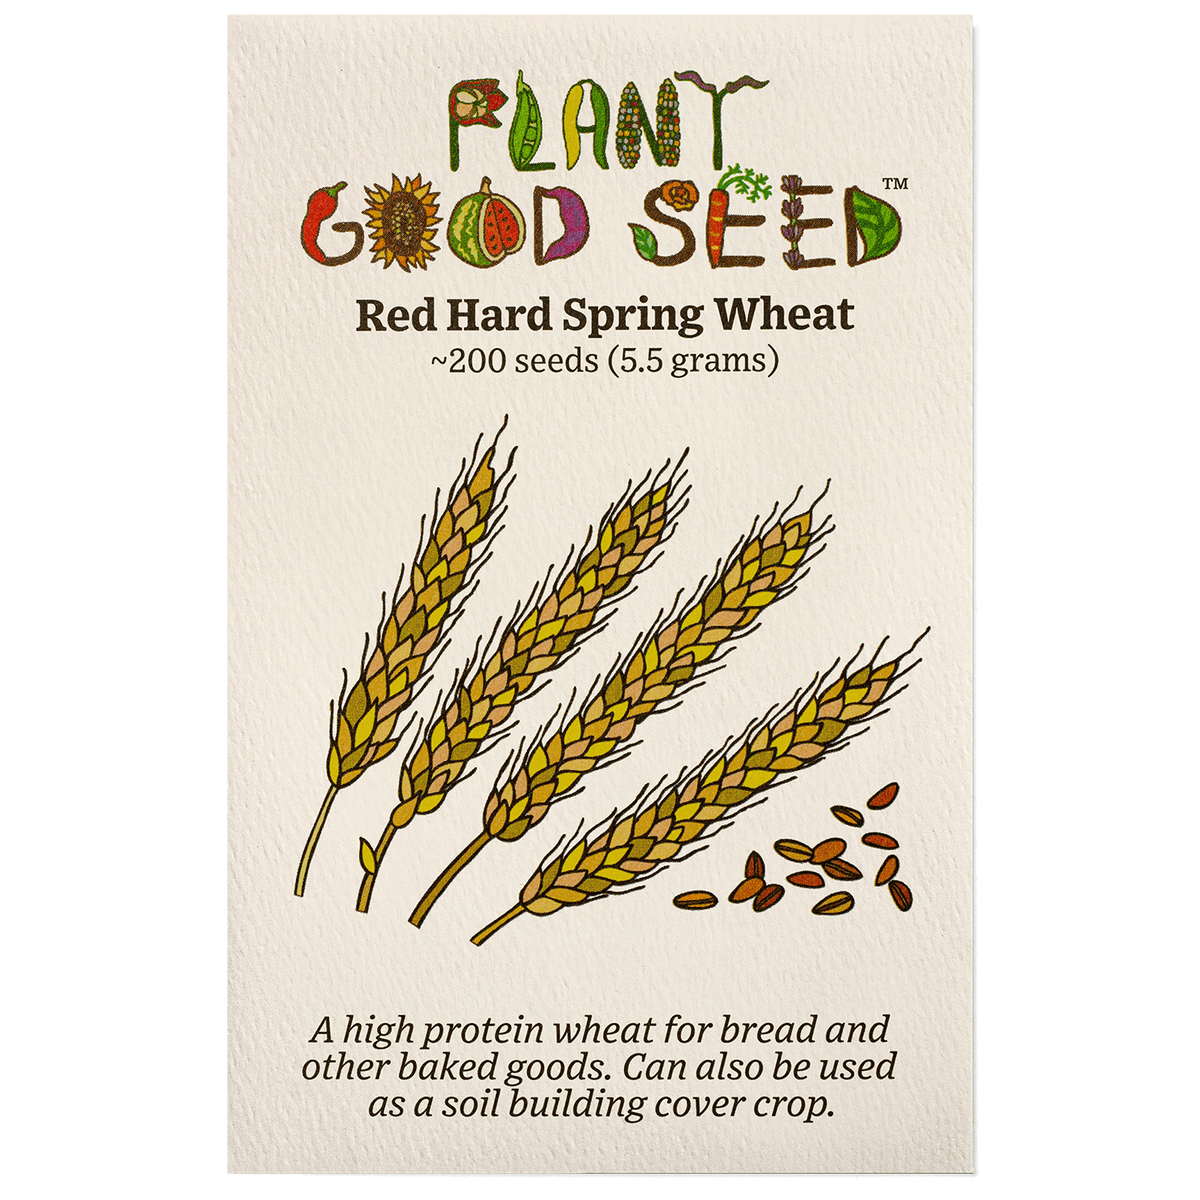 Red Hard Spring Wheat